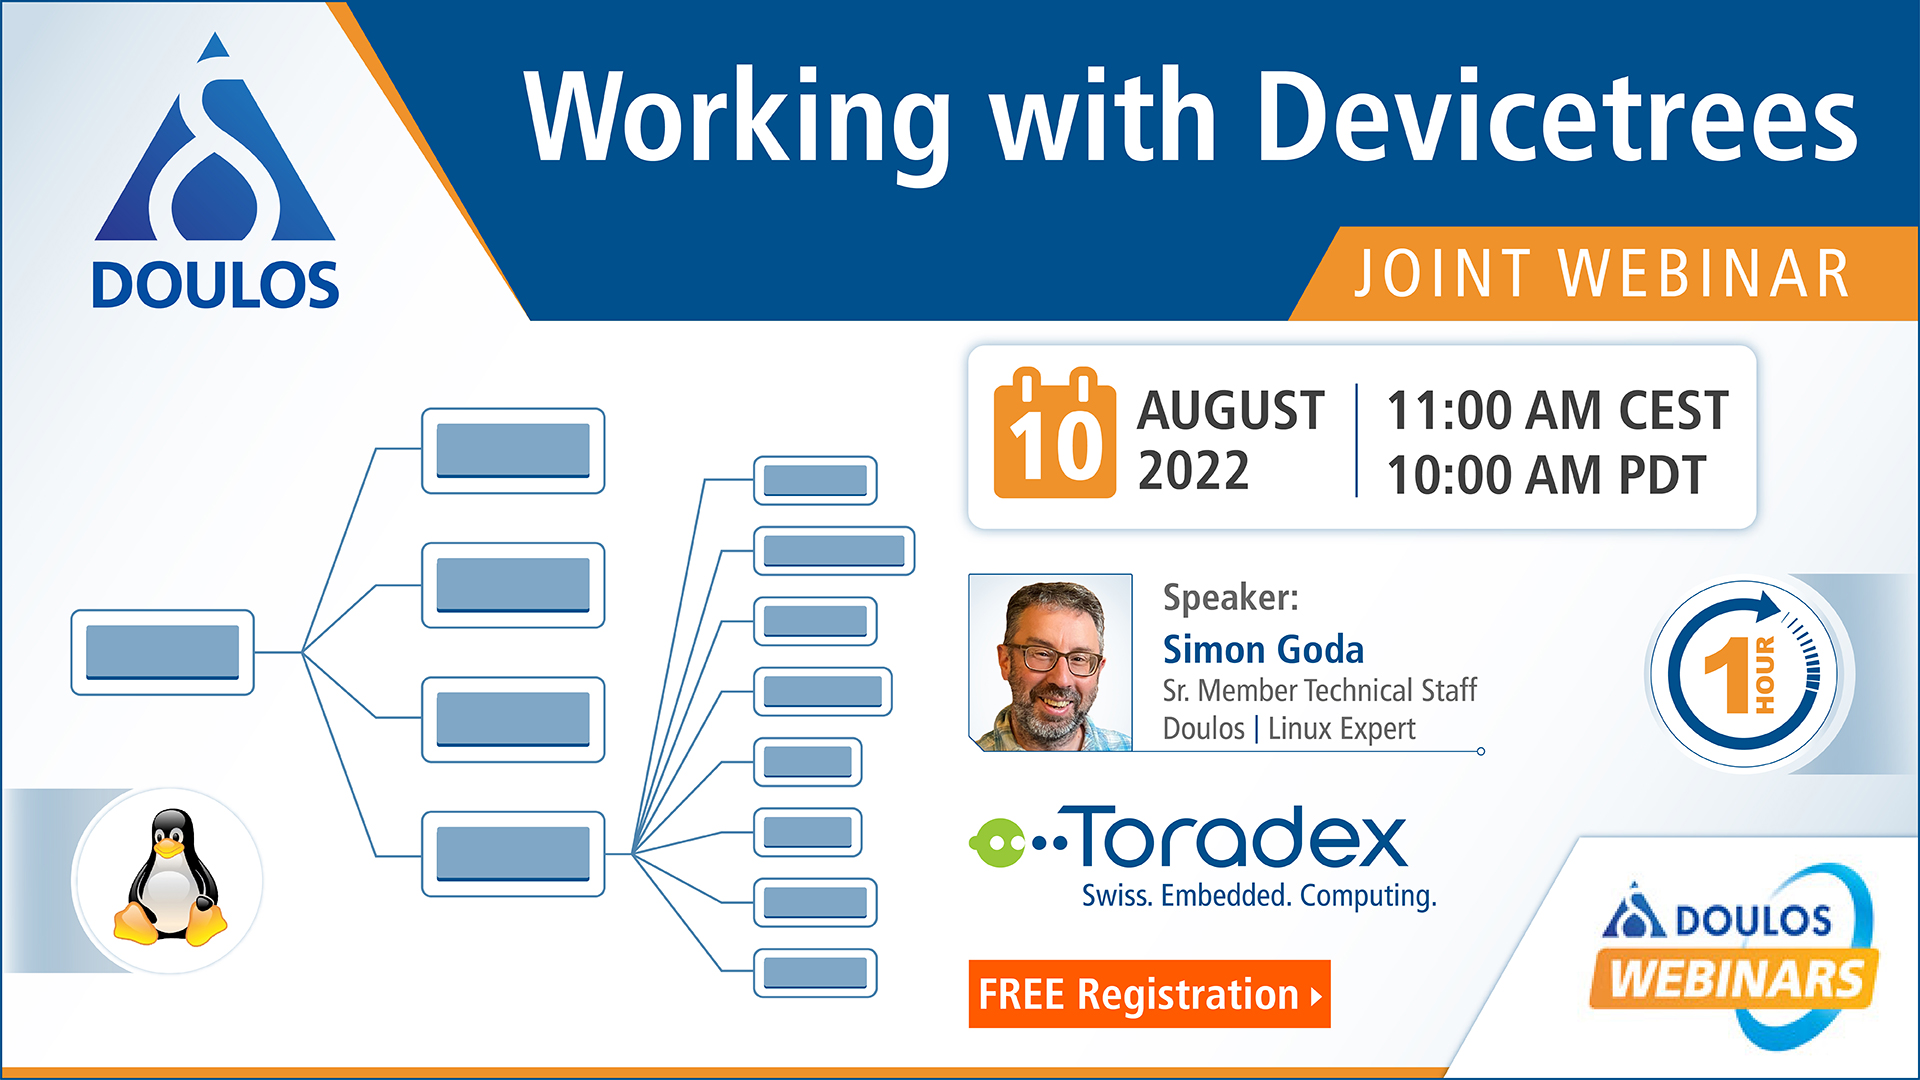 Webinar: Working with Devicetrees, Online Event